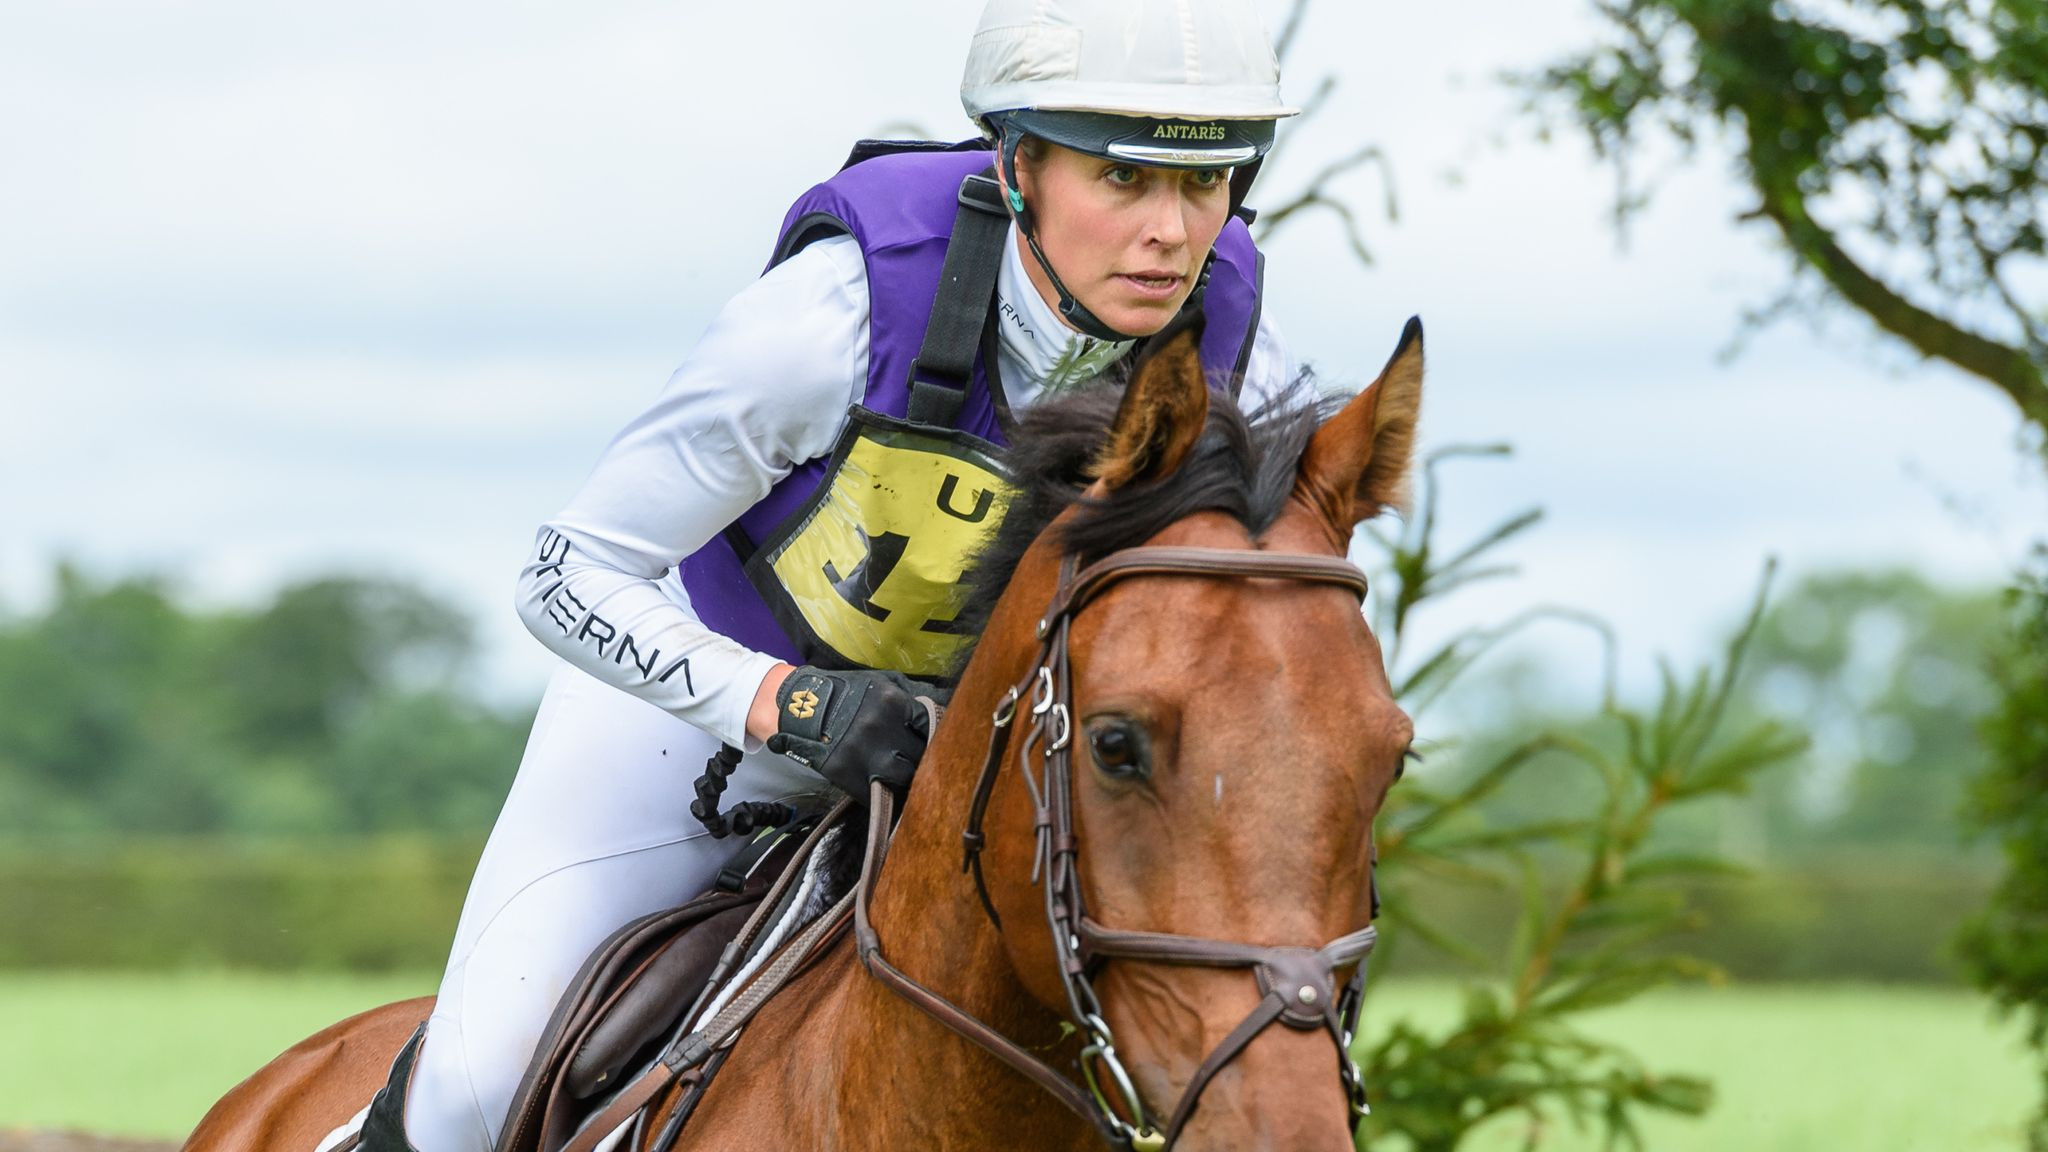 British event rider Georgie Campbell has died after a horror fall. NICO MORGAN